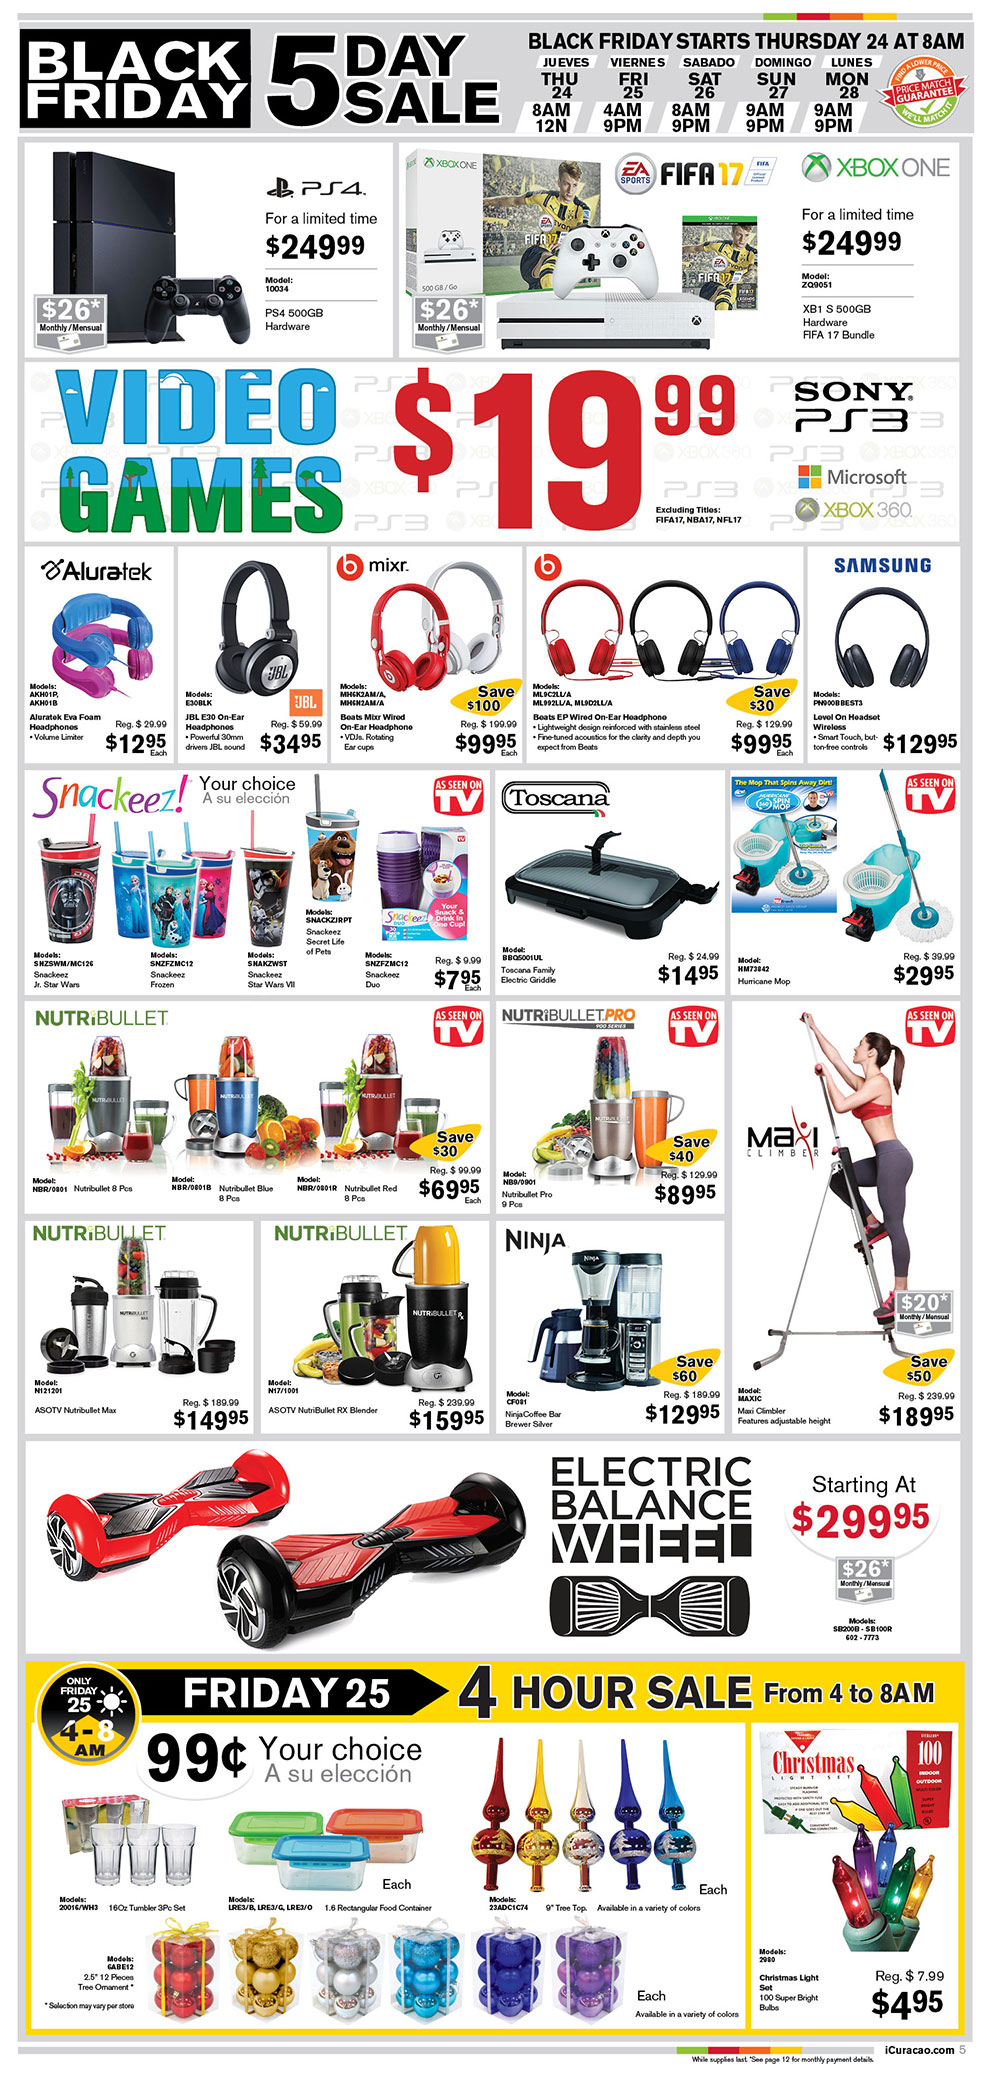 Curacao 2016 Black Friday Ad Page 5